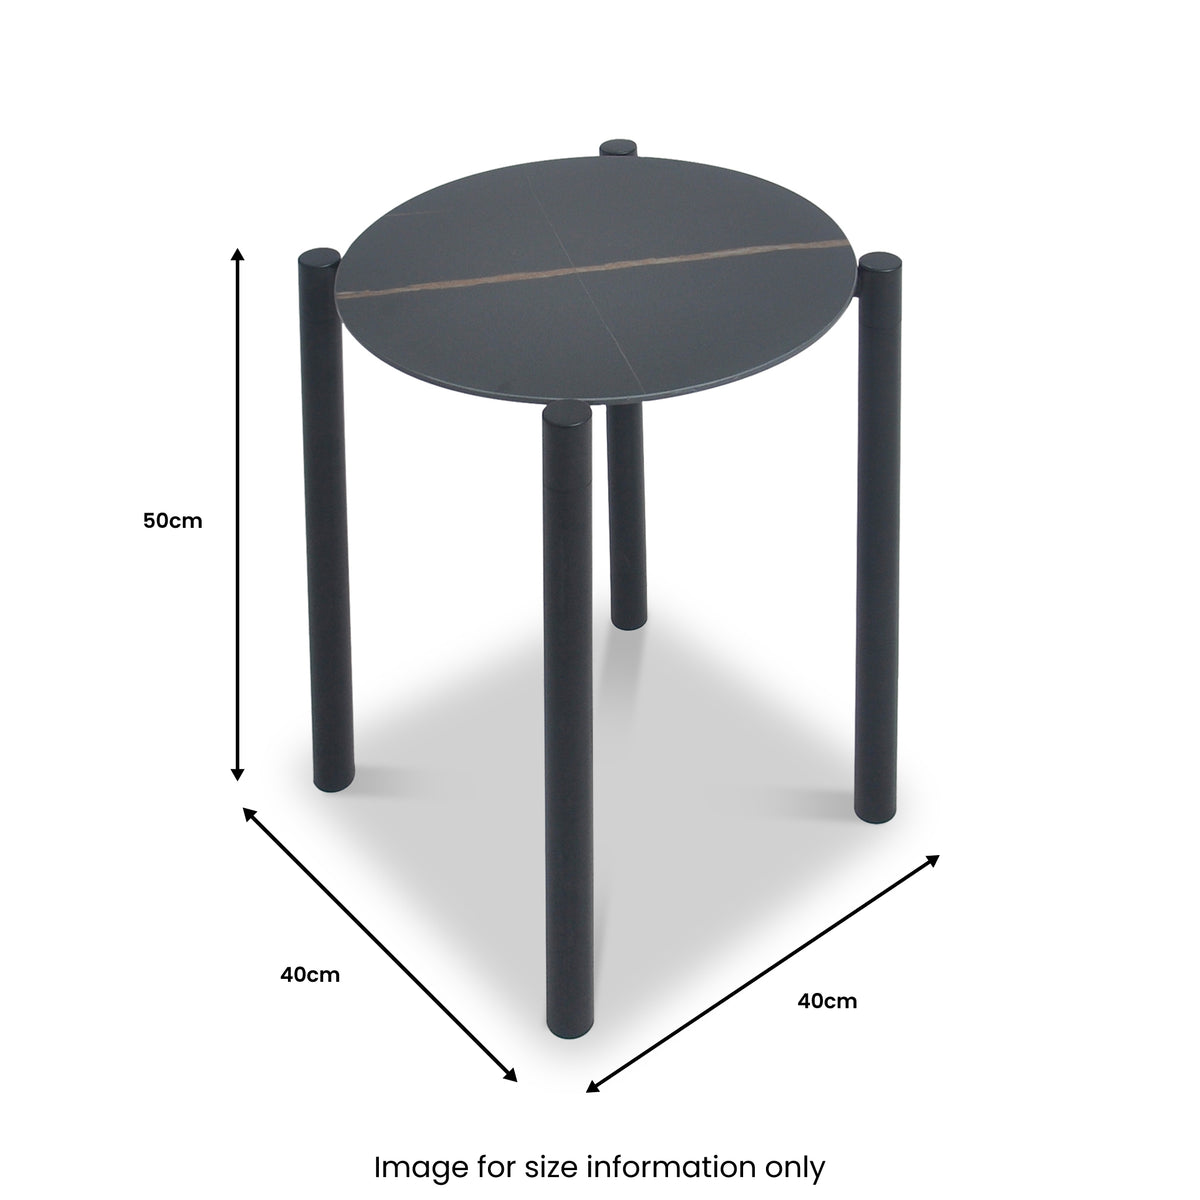 Dalston Black Marble Ceramic Side Table dimensions